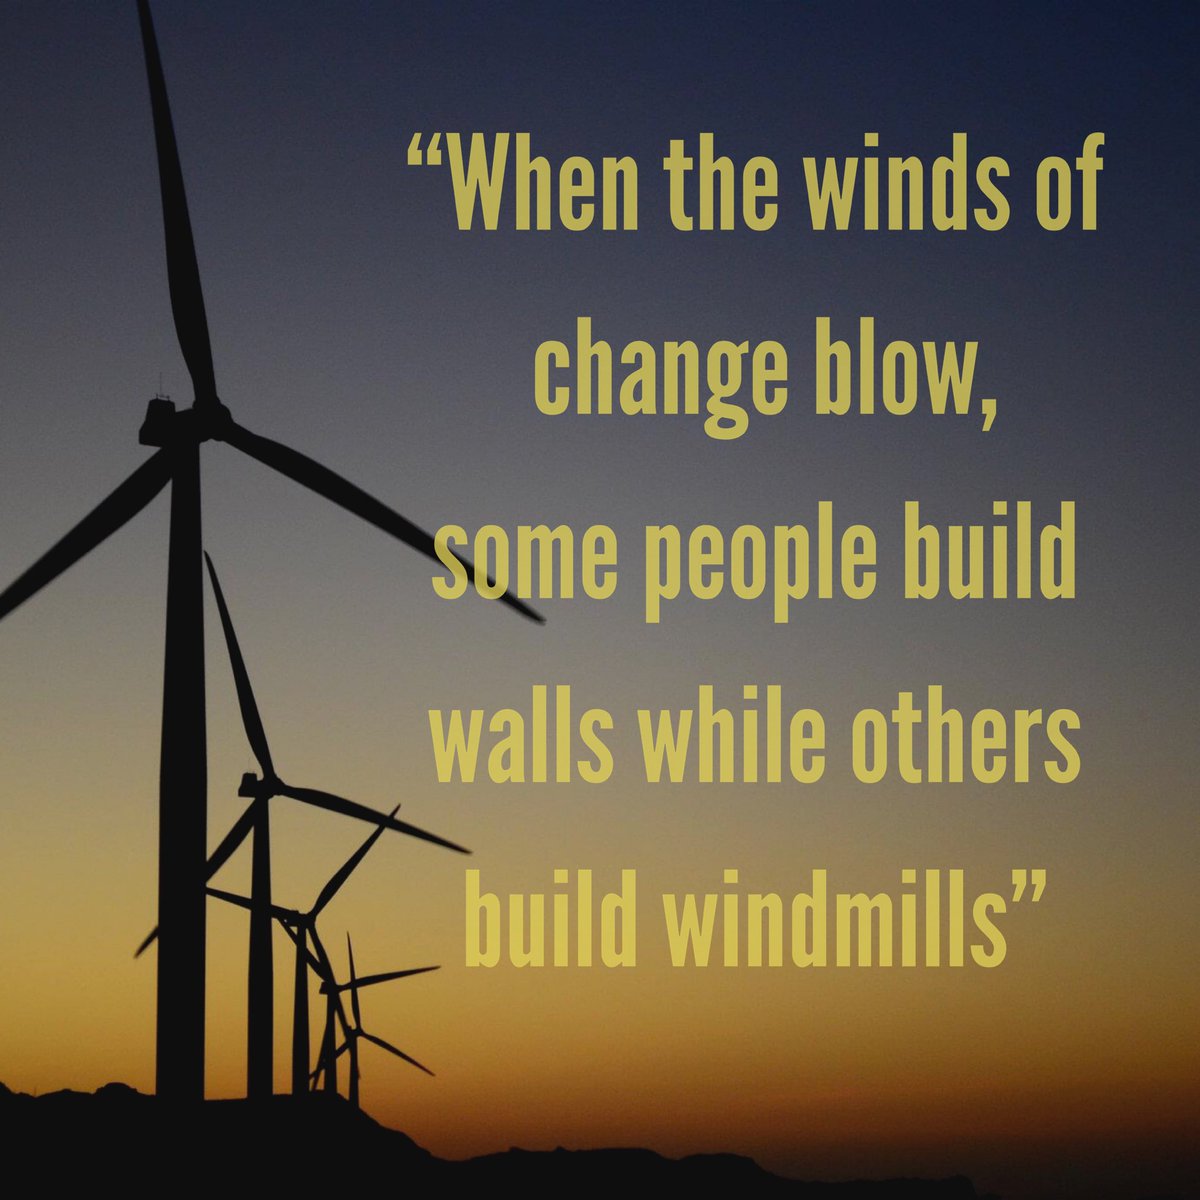 From Chinese Proverb -Wibuy.net Team #windmills #windmill #renewableenergy #renewable #renewableresource #renewableresources #quotefortheday #quotefortoday #wibuyquotes #beautifulphotography #dawn #picturetakenatdawn #ilocoswindmill #ilocoswindmills #ilocoswindmills🇵🇭❤️ #wibuy